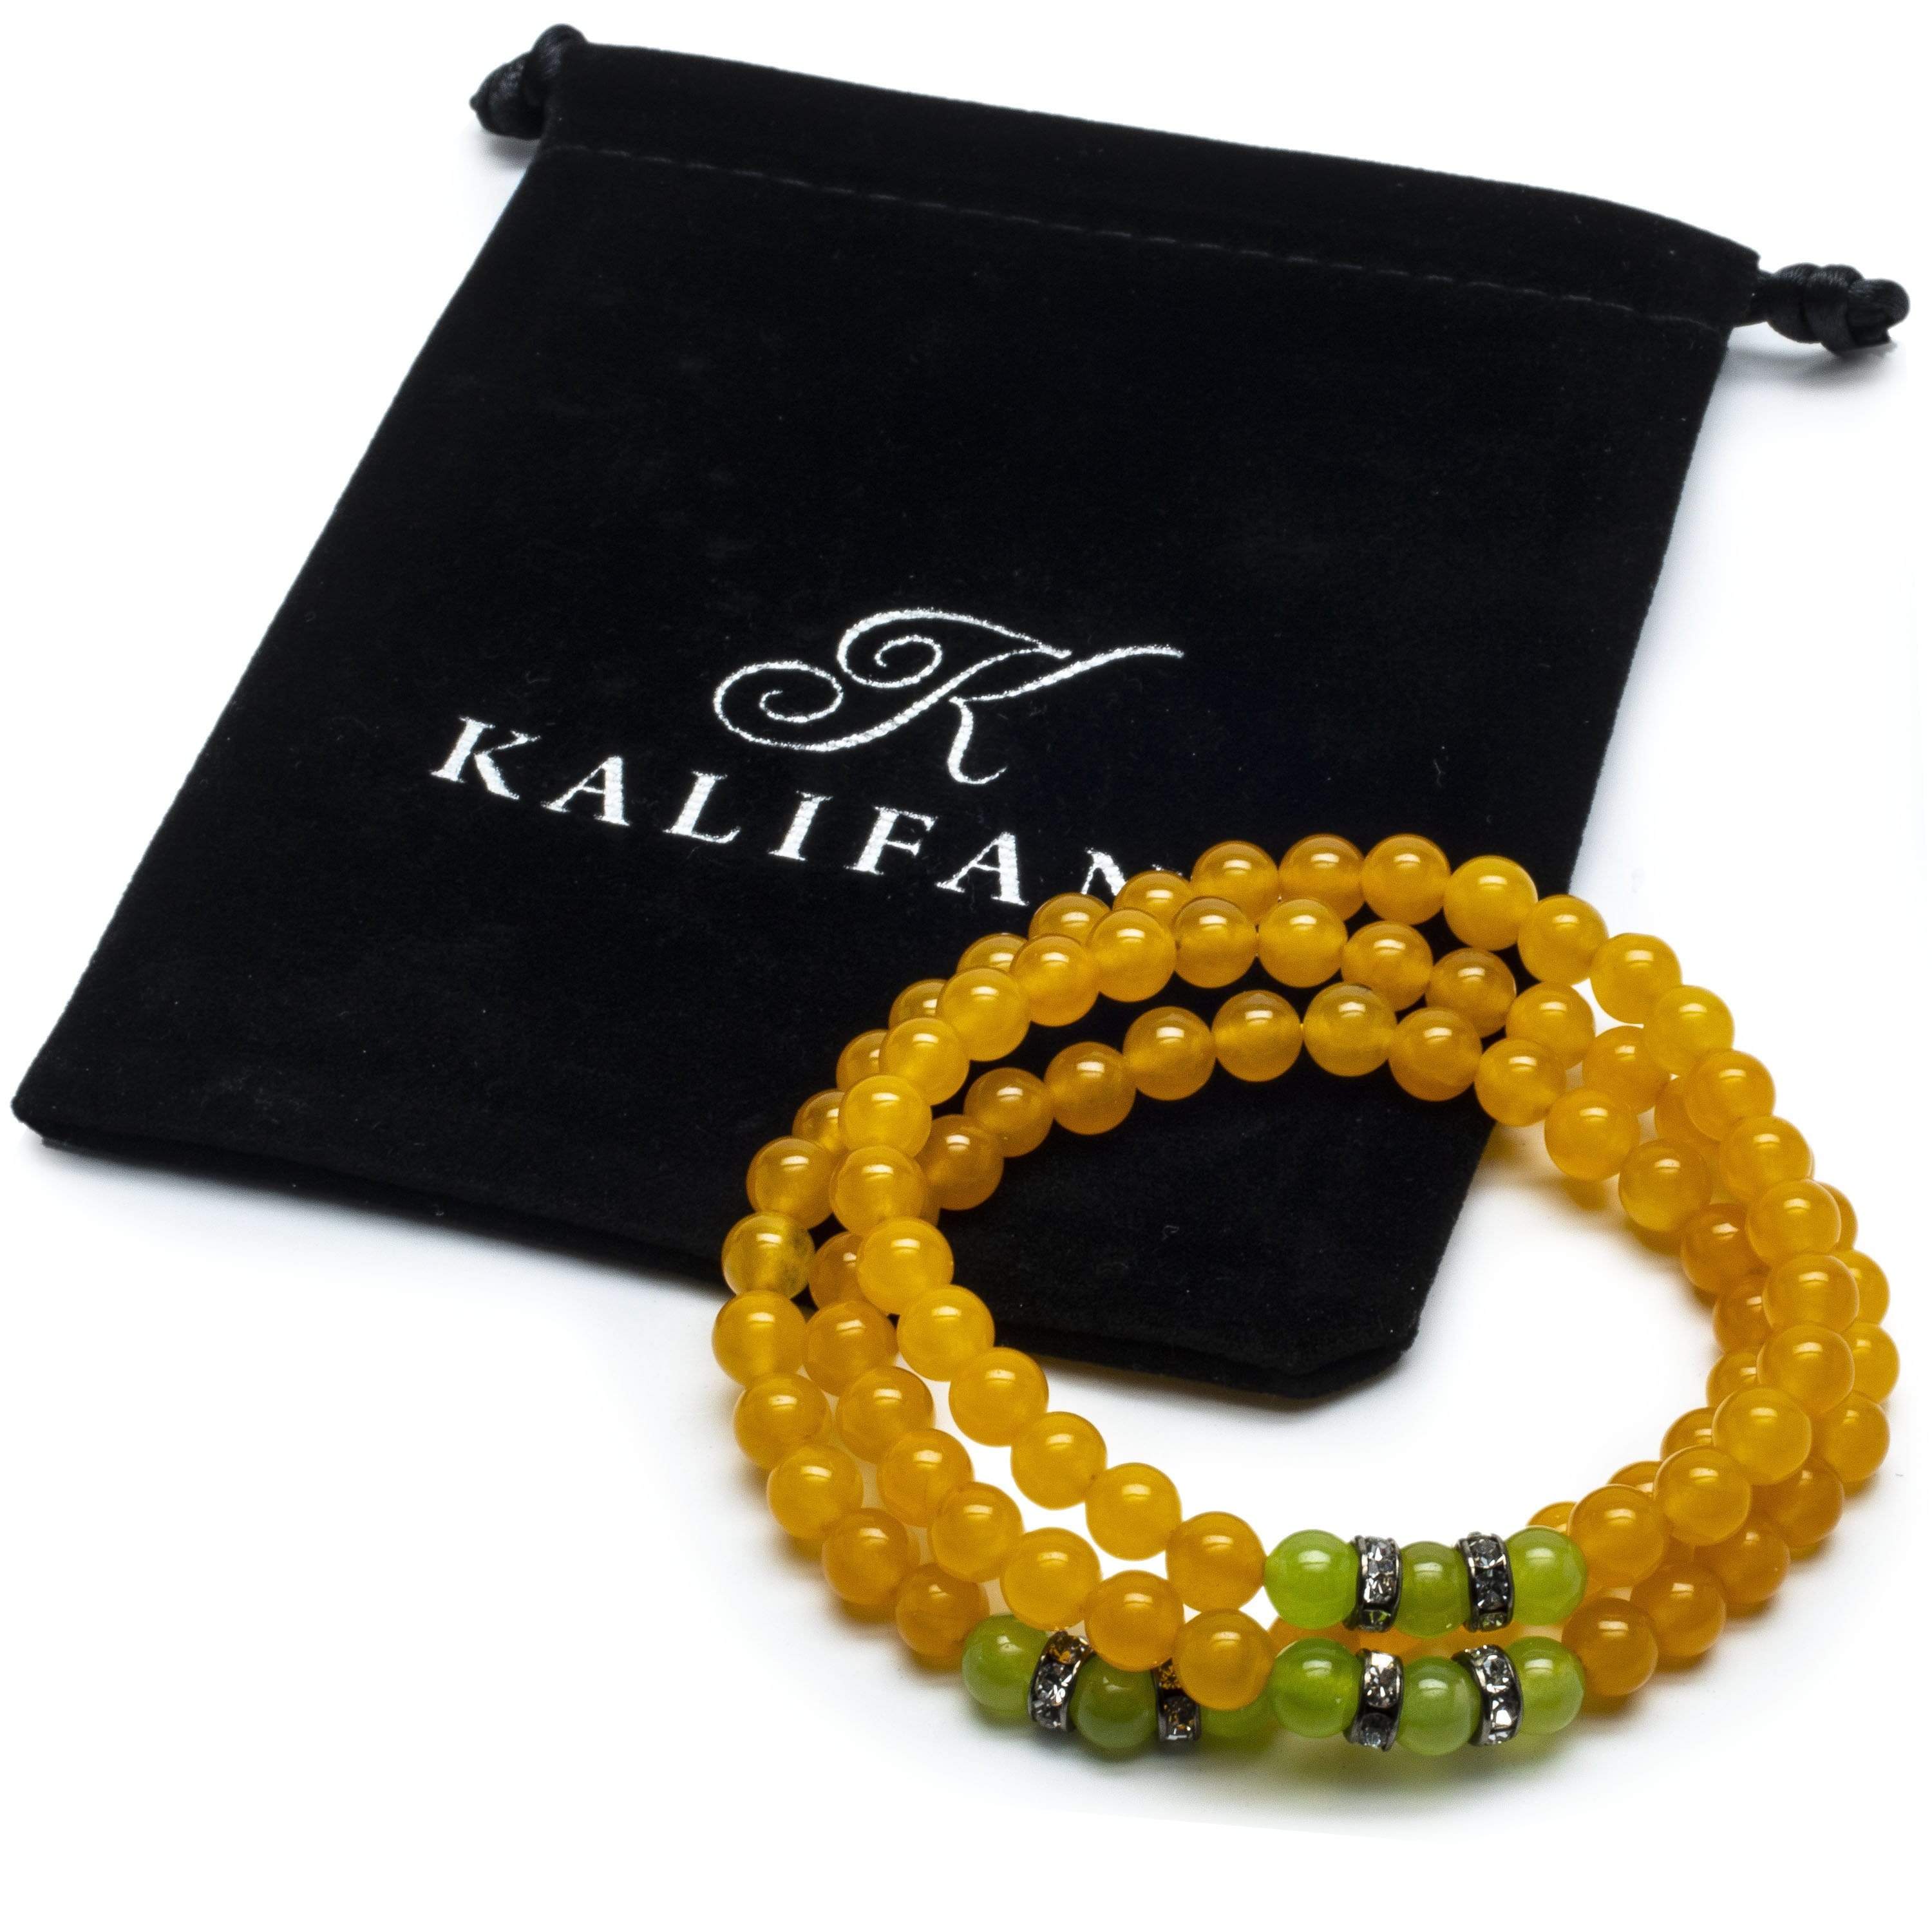 Kalifano Gemstone Bracelets Yellow Agate 6mm Beads with Green Agate and Silver Crystal Accent Beads Triple Wrap Elastic Gemstone Bracelet WHITE-BGI3-064